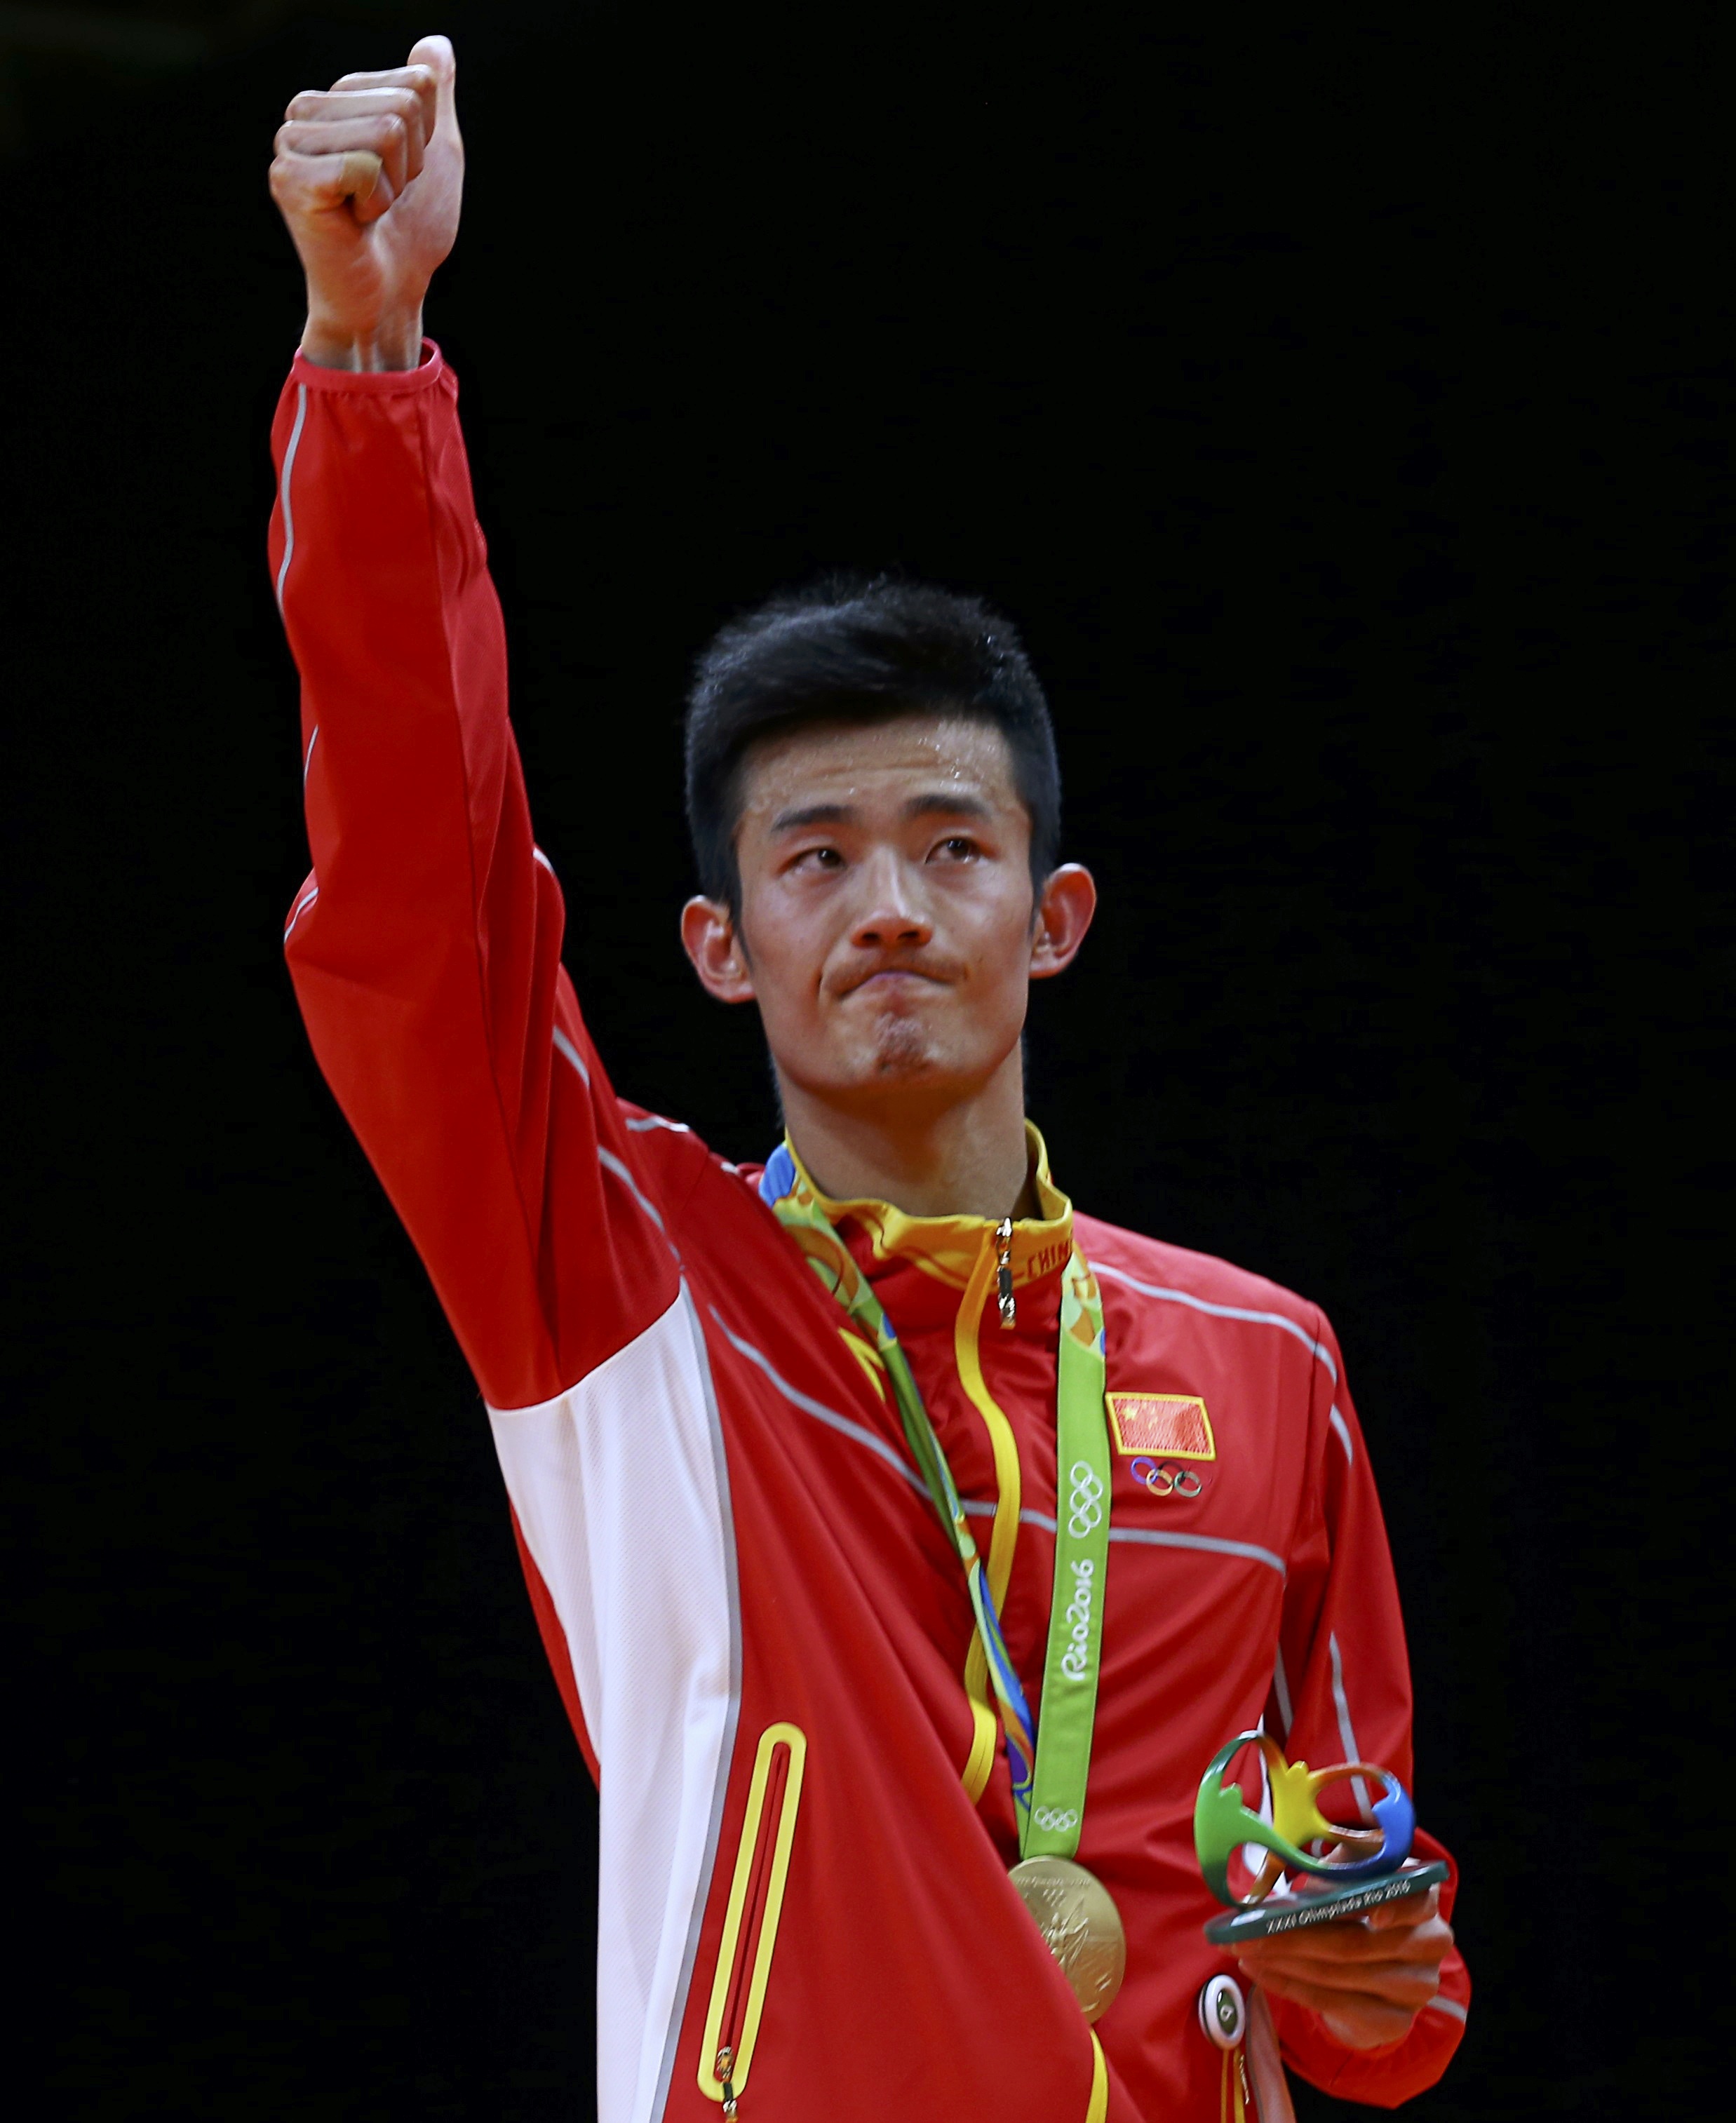 Olympics: China's Chen takes badminton gold to leave Lee heartbroken